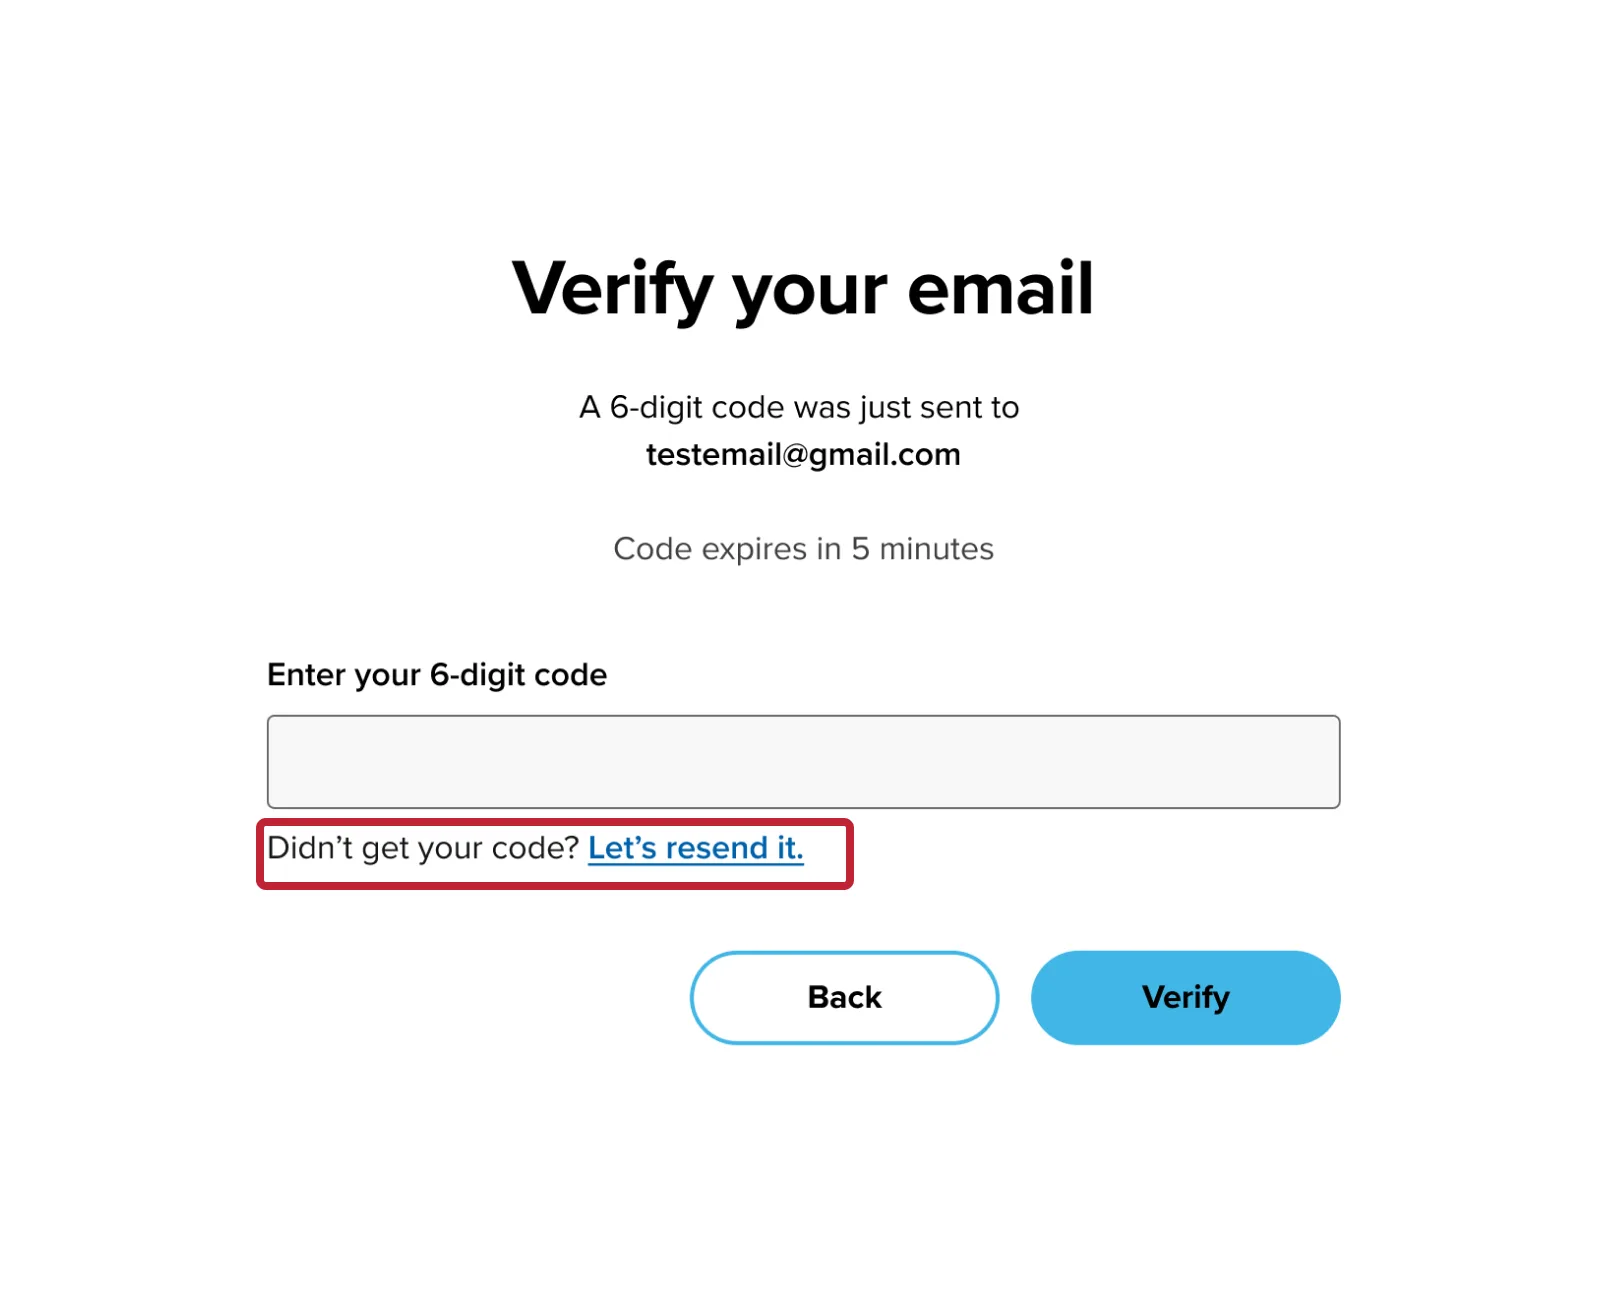 A screenshot of the “verify your email” web page. The “let’s resend it” action is highlighted, which is located directly after the 6-digit code input field.